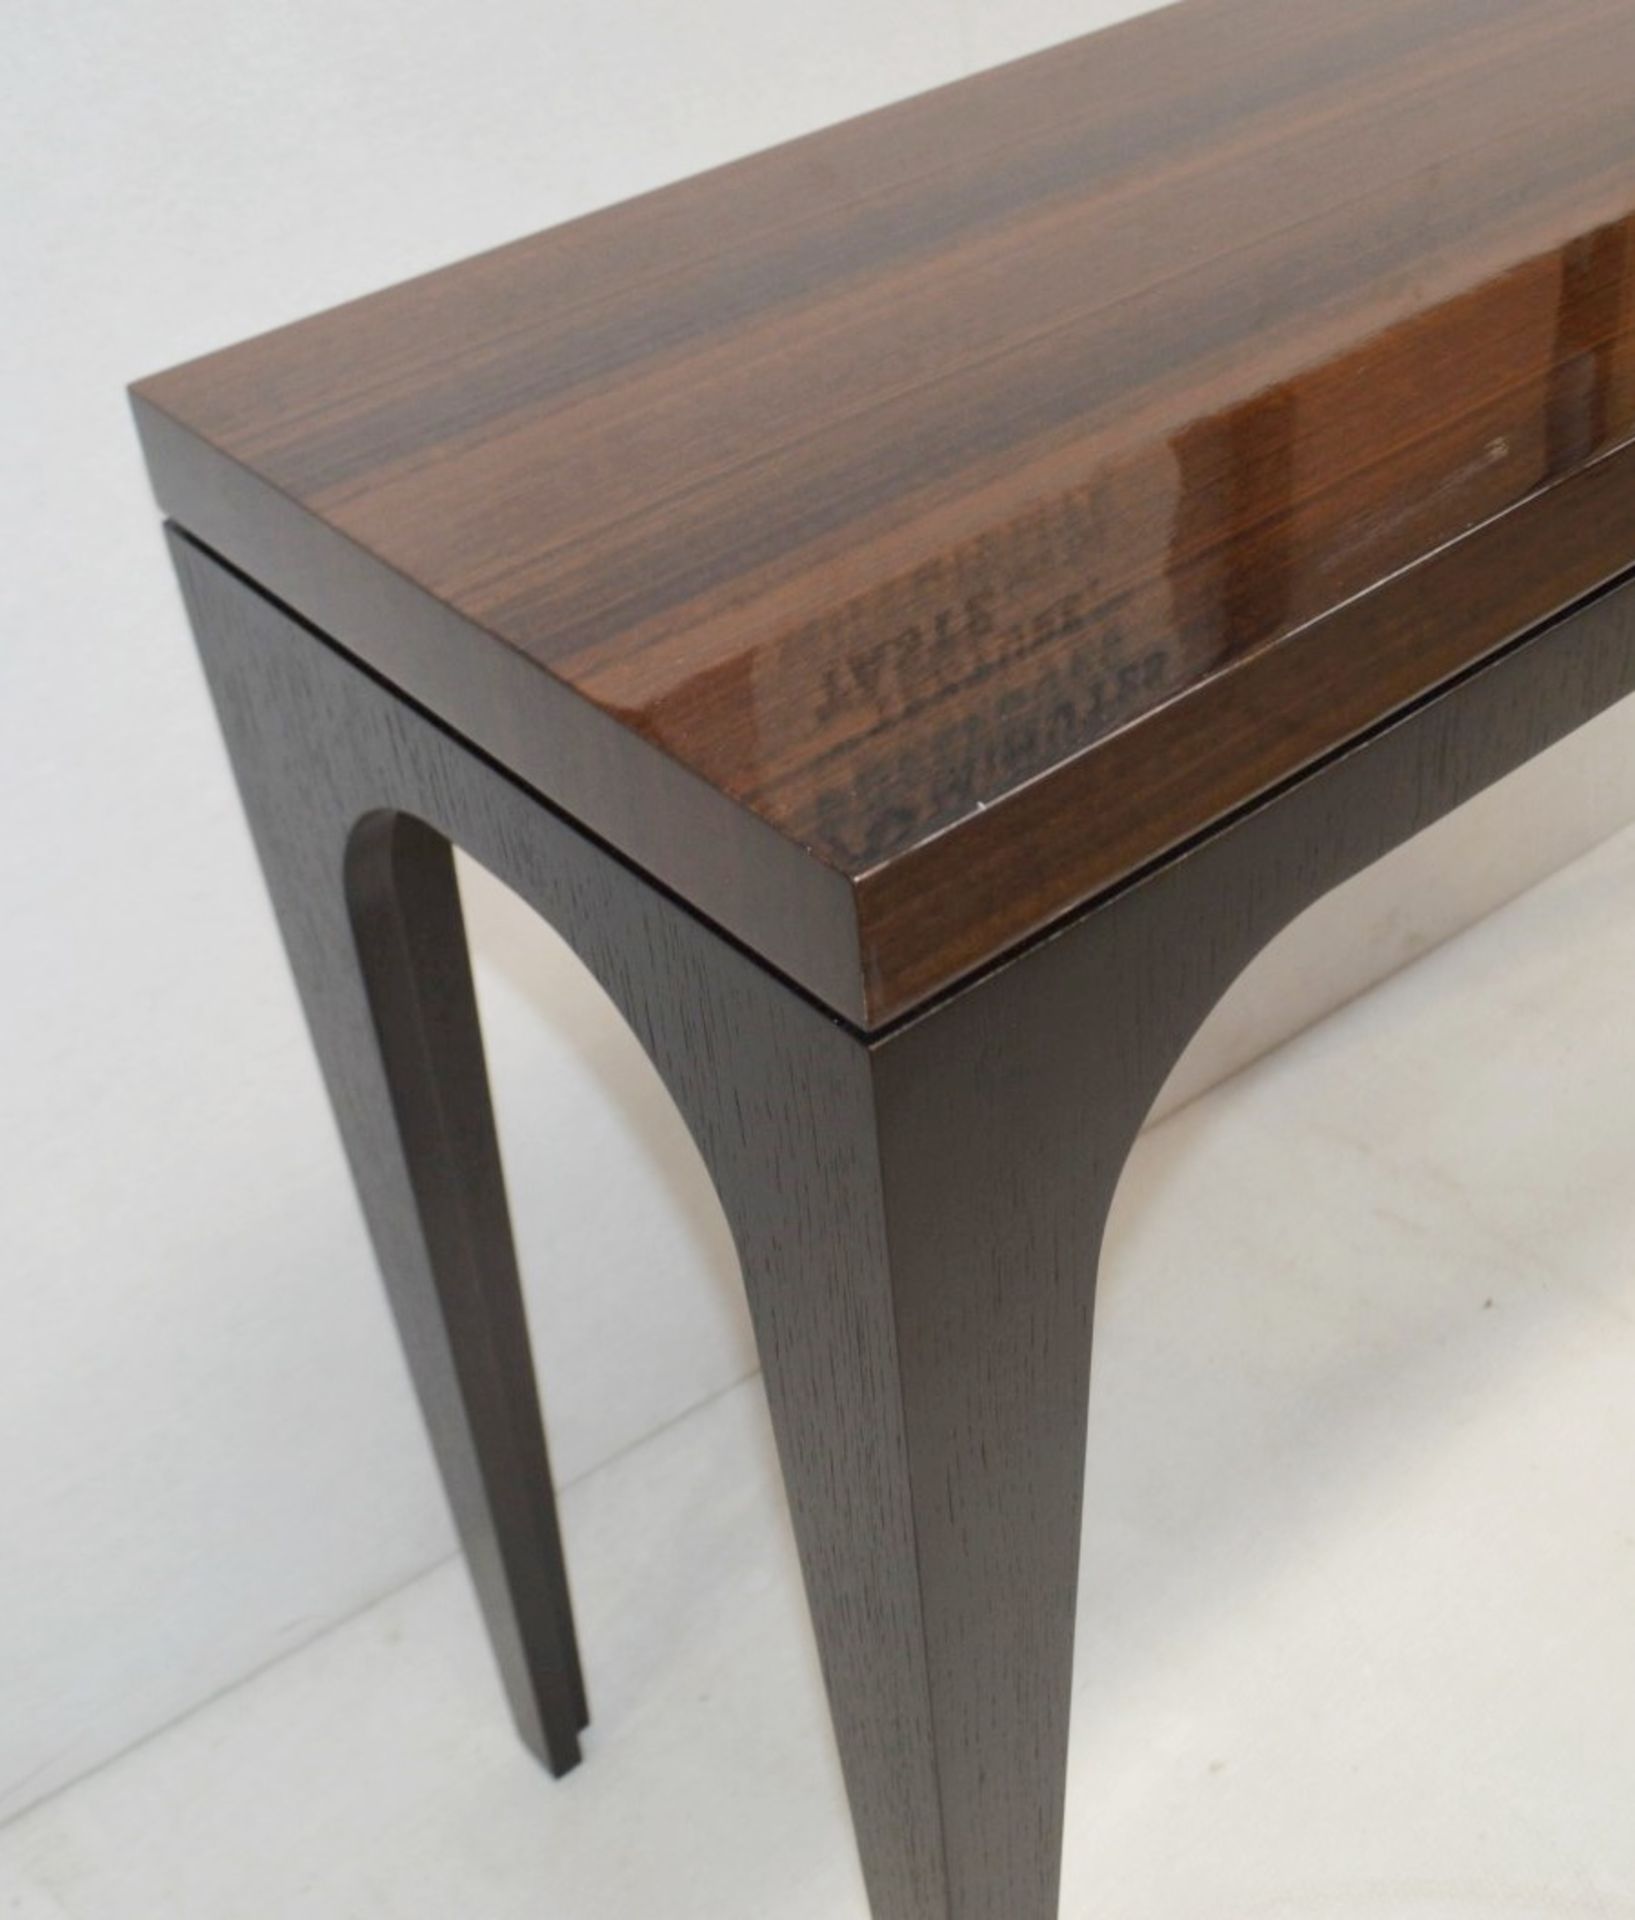 1 x FRATO 'NEW YORK' Luxury Console Table With A High Gloss Finish - Original RRP £1,173 - Image 3 of 7